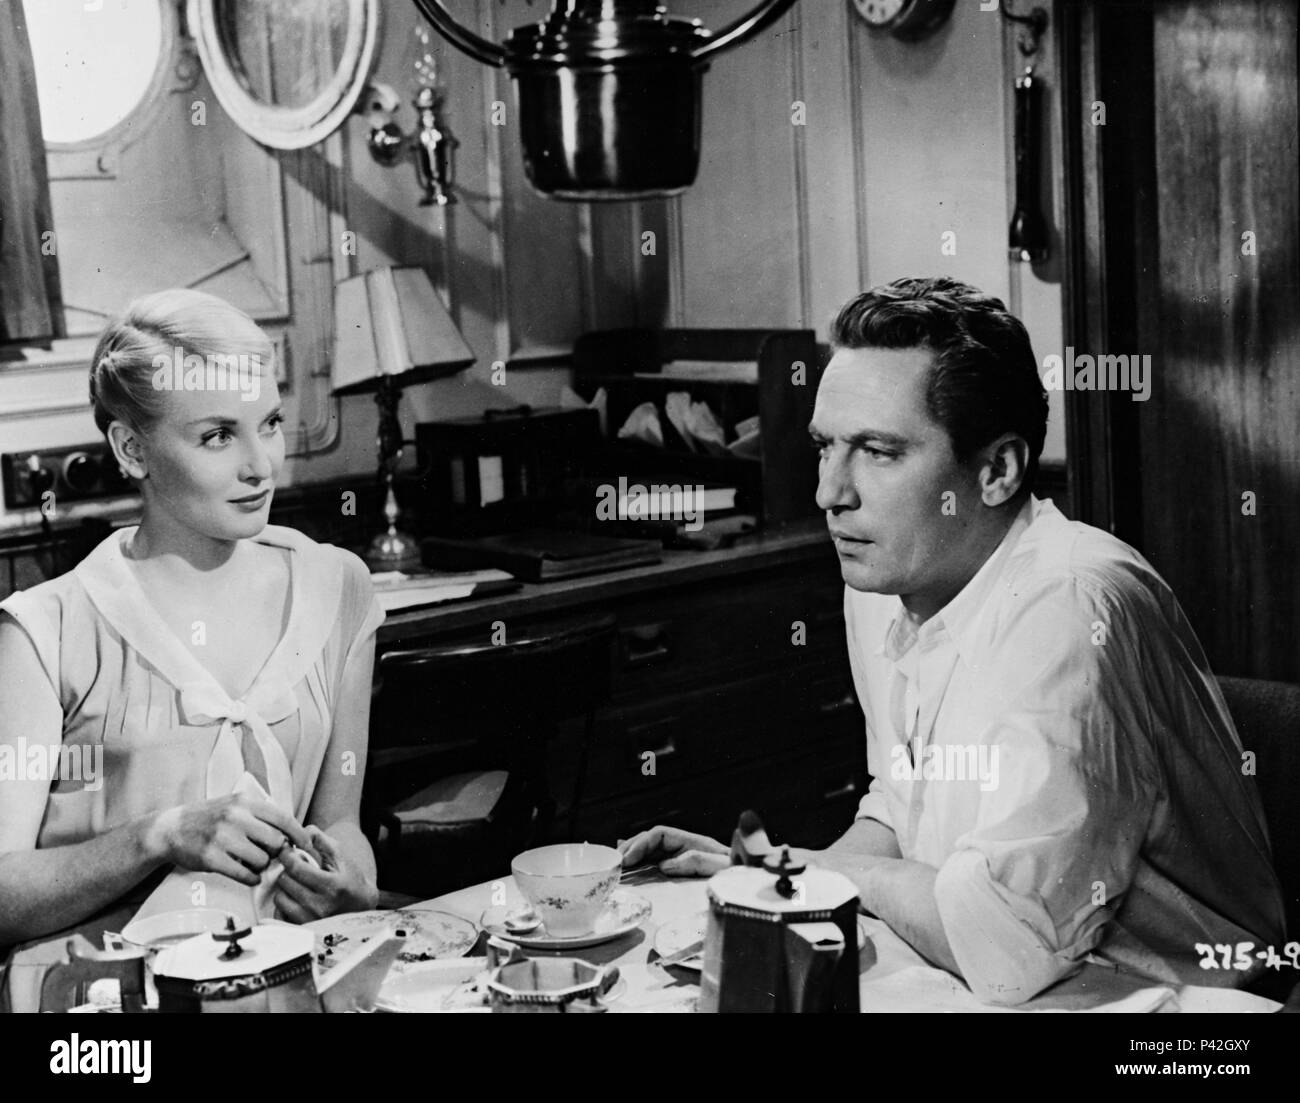 Original Film Title: PASSAGE HOME.  English Title: PASSAGE HOME.  Film Director: ROY WARD BAKER.  Year: 1955.  Stars: PETER FINCH; DIANE CILENTO. Credit: GROUP FILM PRODUCTIONS LIMITED / Album Stock Photo